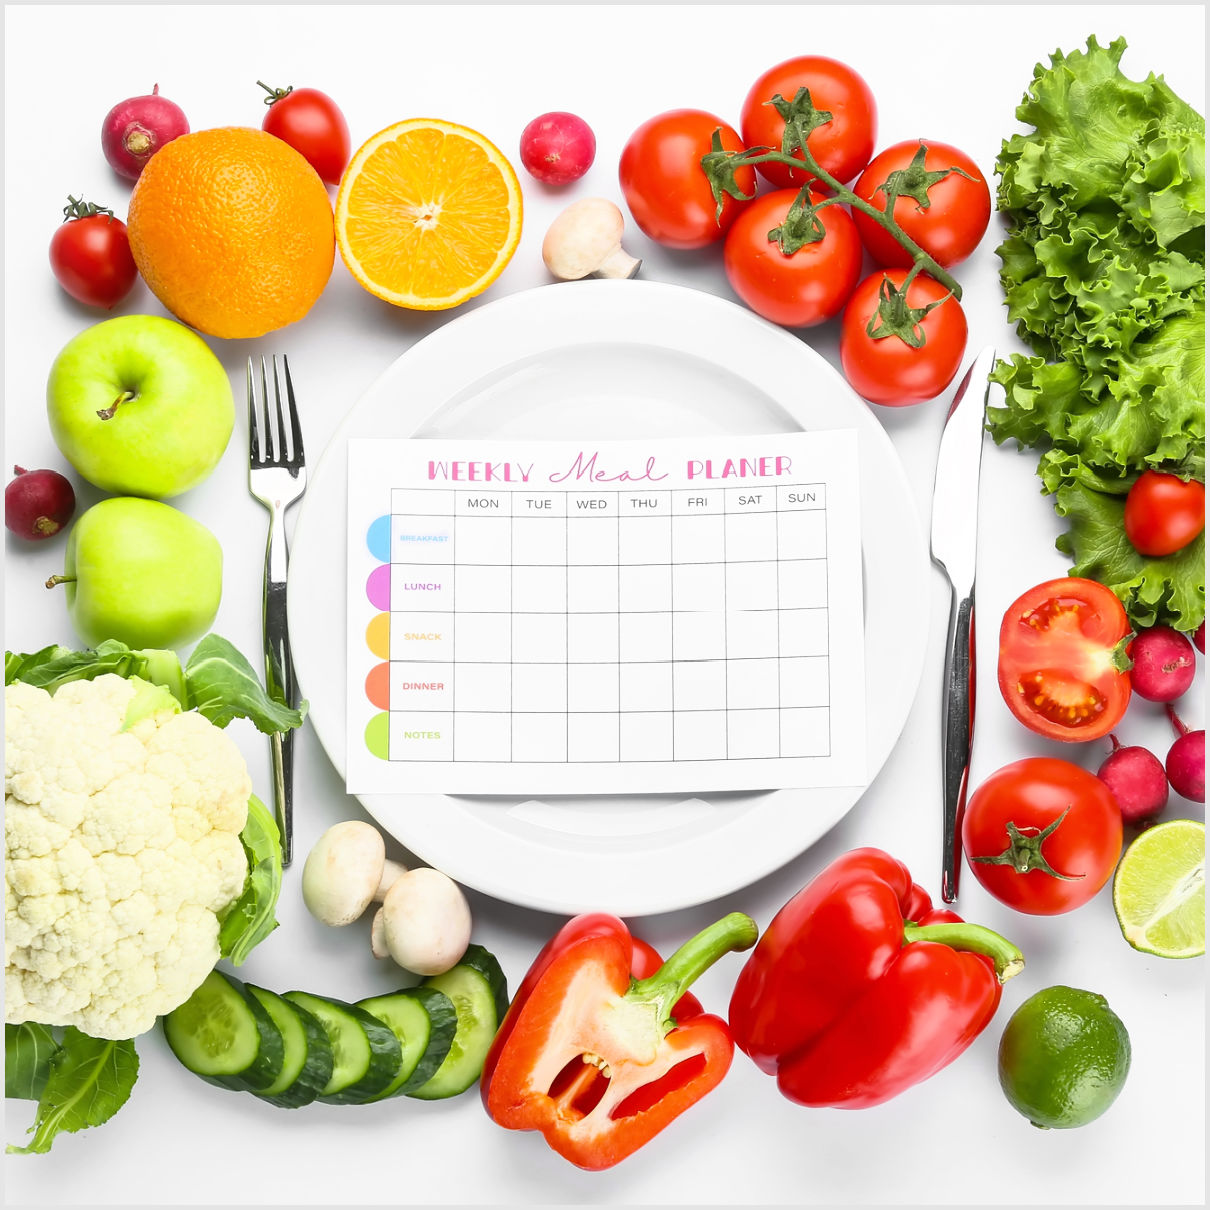 meal planner with fresh veggies and fruit around